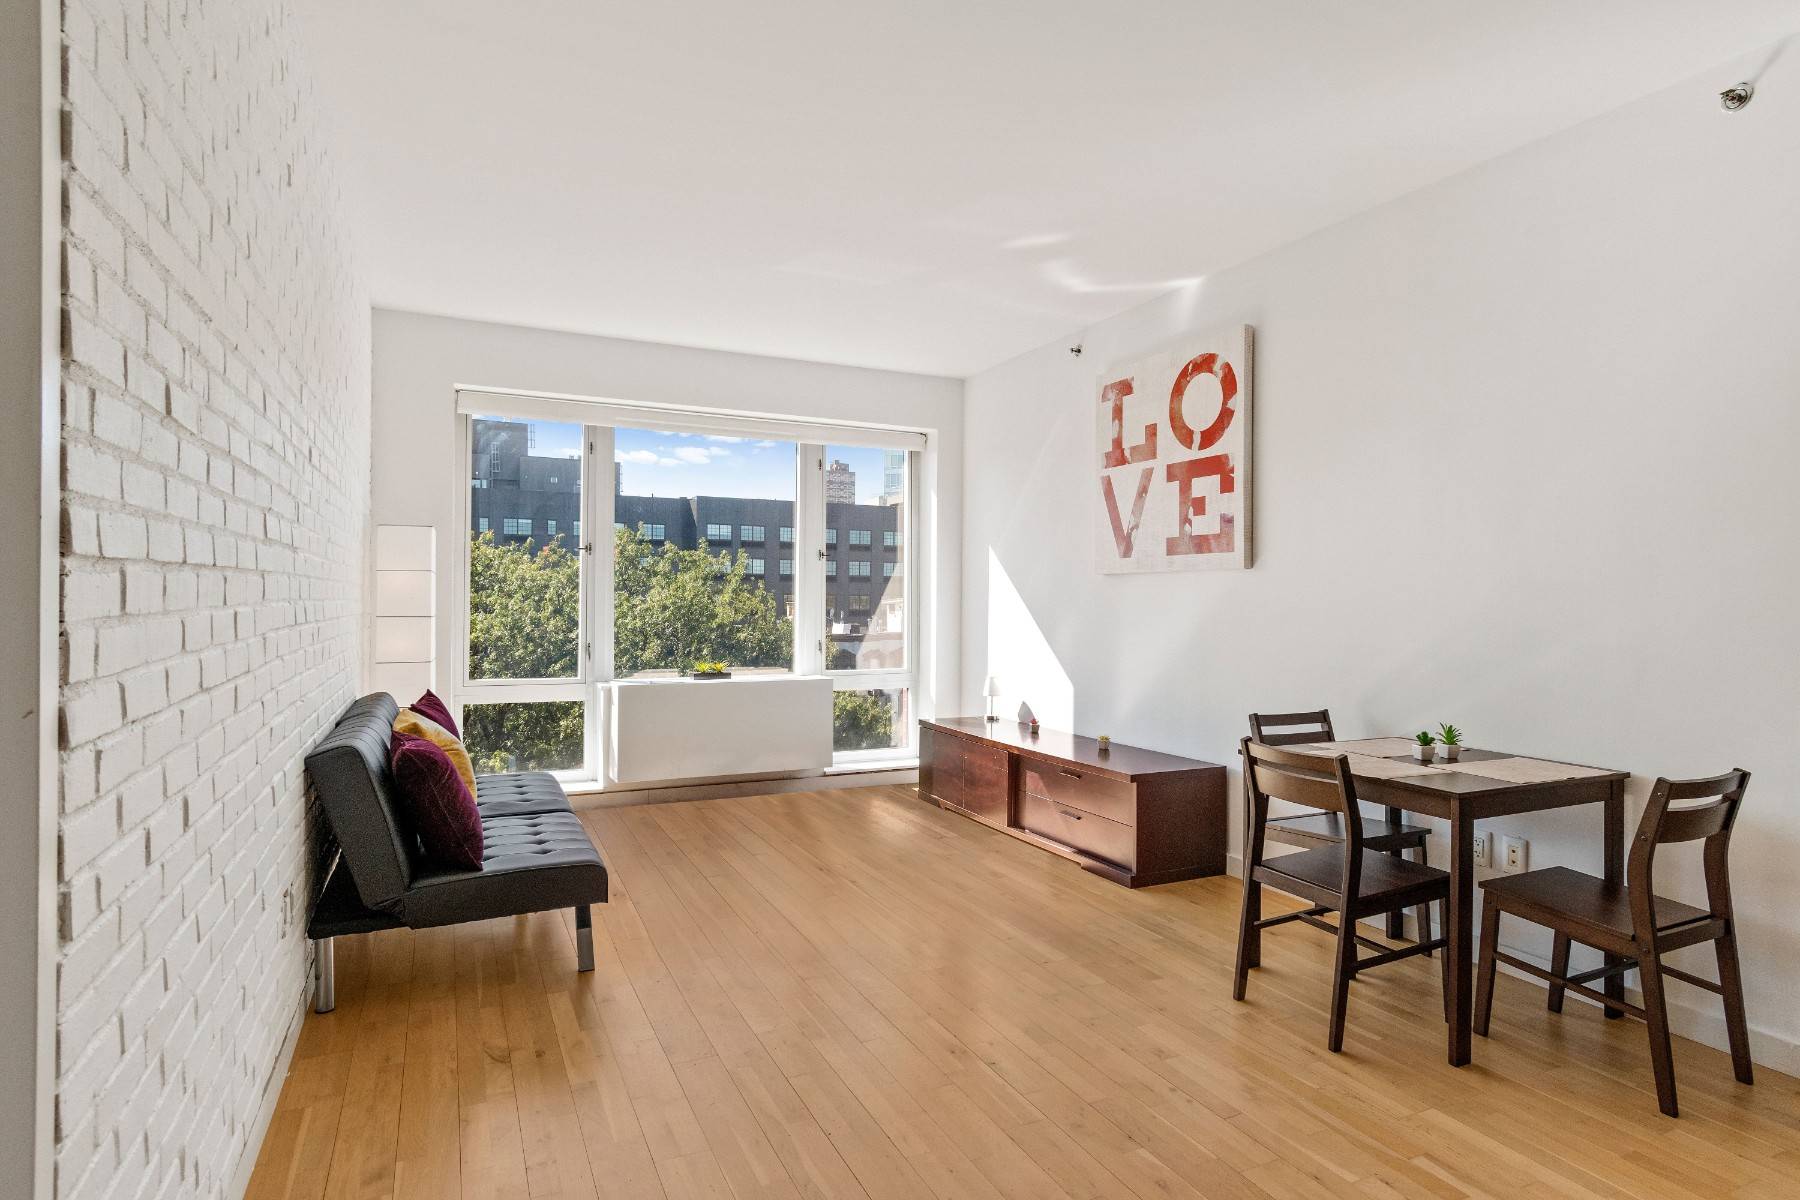 Welcome to unit 605 at the Isabella Condominium located in prime Clinton Hill on a beautiful tree lined block.